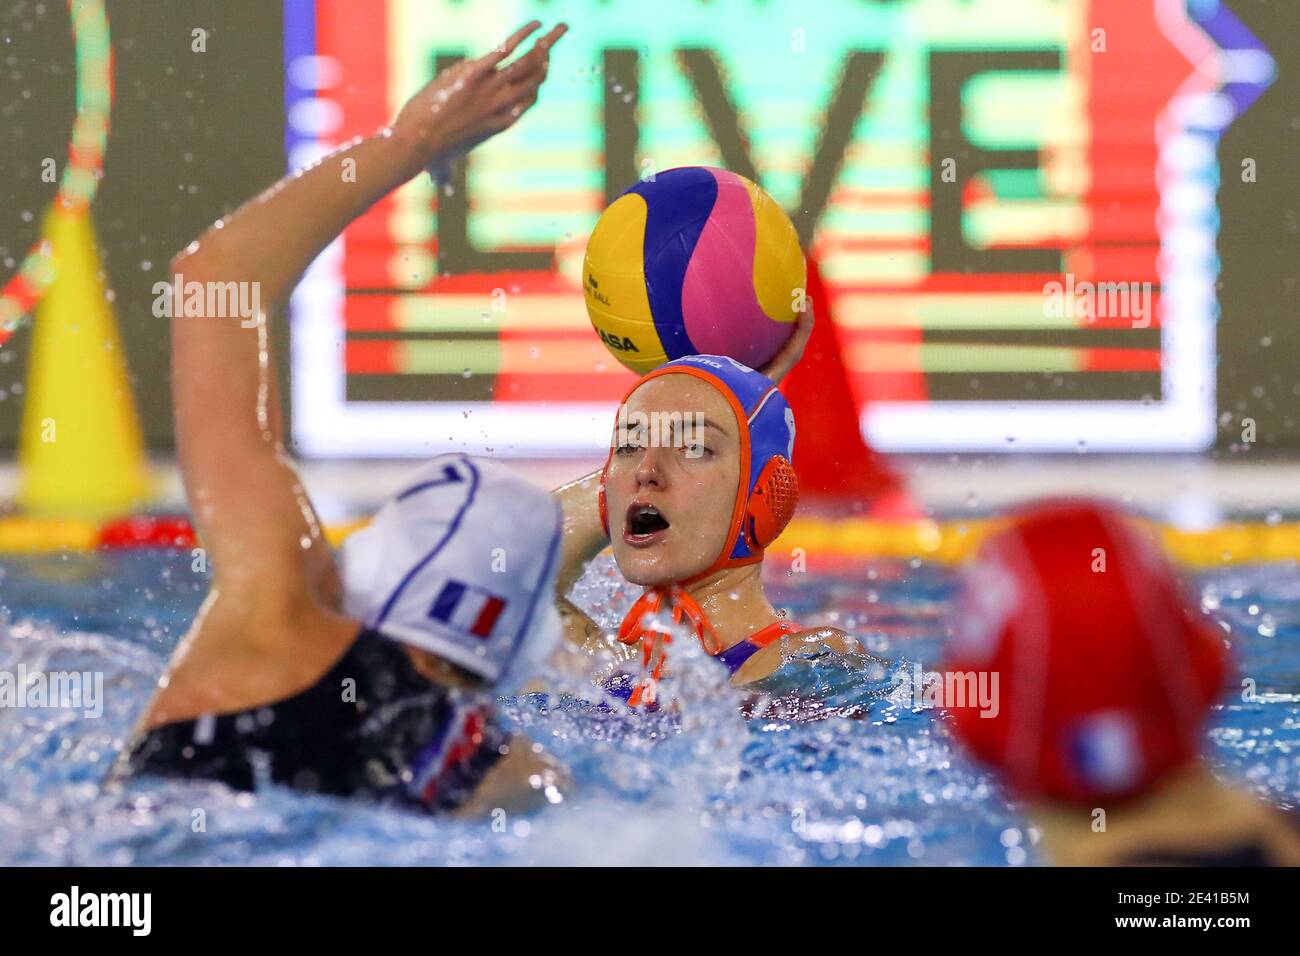 TRIESTE, ITALY - JANUARY 21: Juliette Marie Dhalluin of France, Sabrina Van Der Sloot of Netherlands during the match between France and The Netherlan Stock Photo